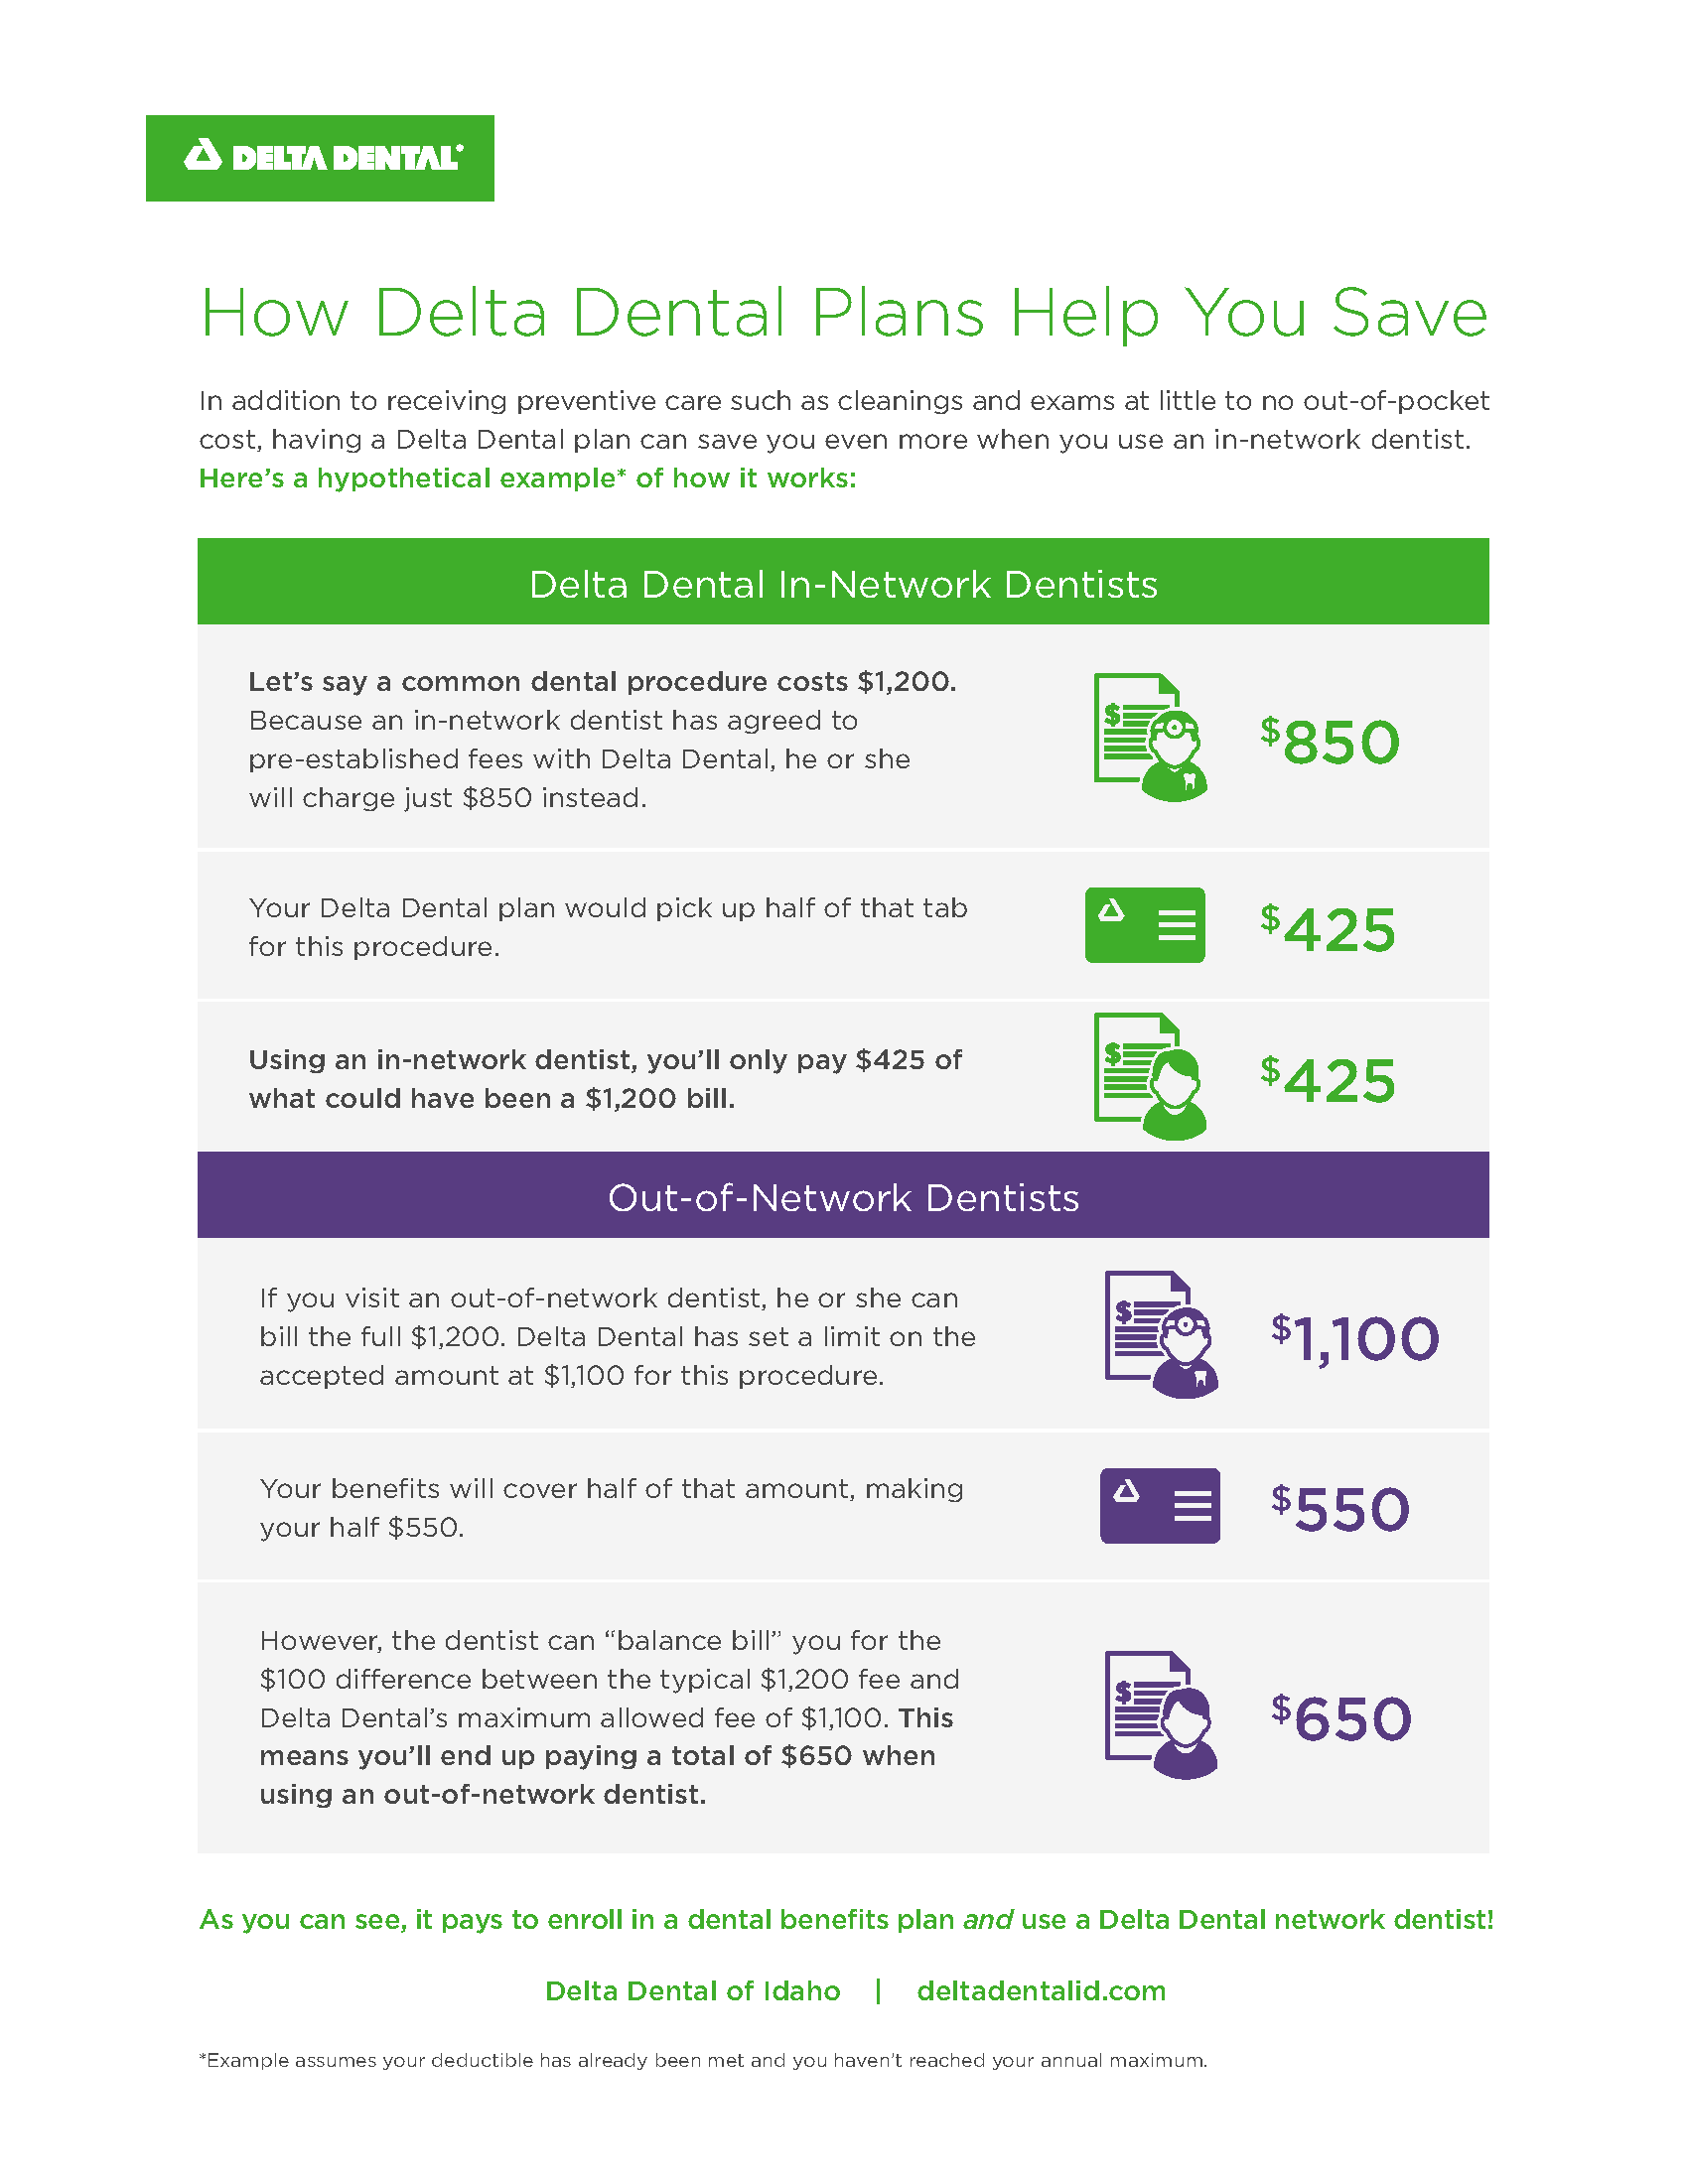 8422-how-delta-dental-plans-help-you-save-id-8-5x11_f1